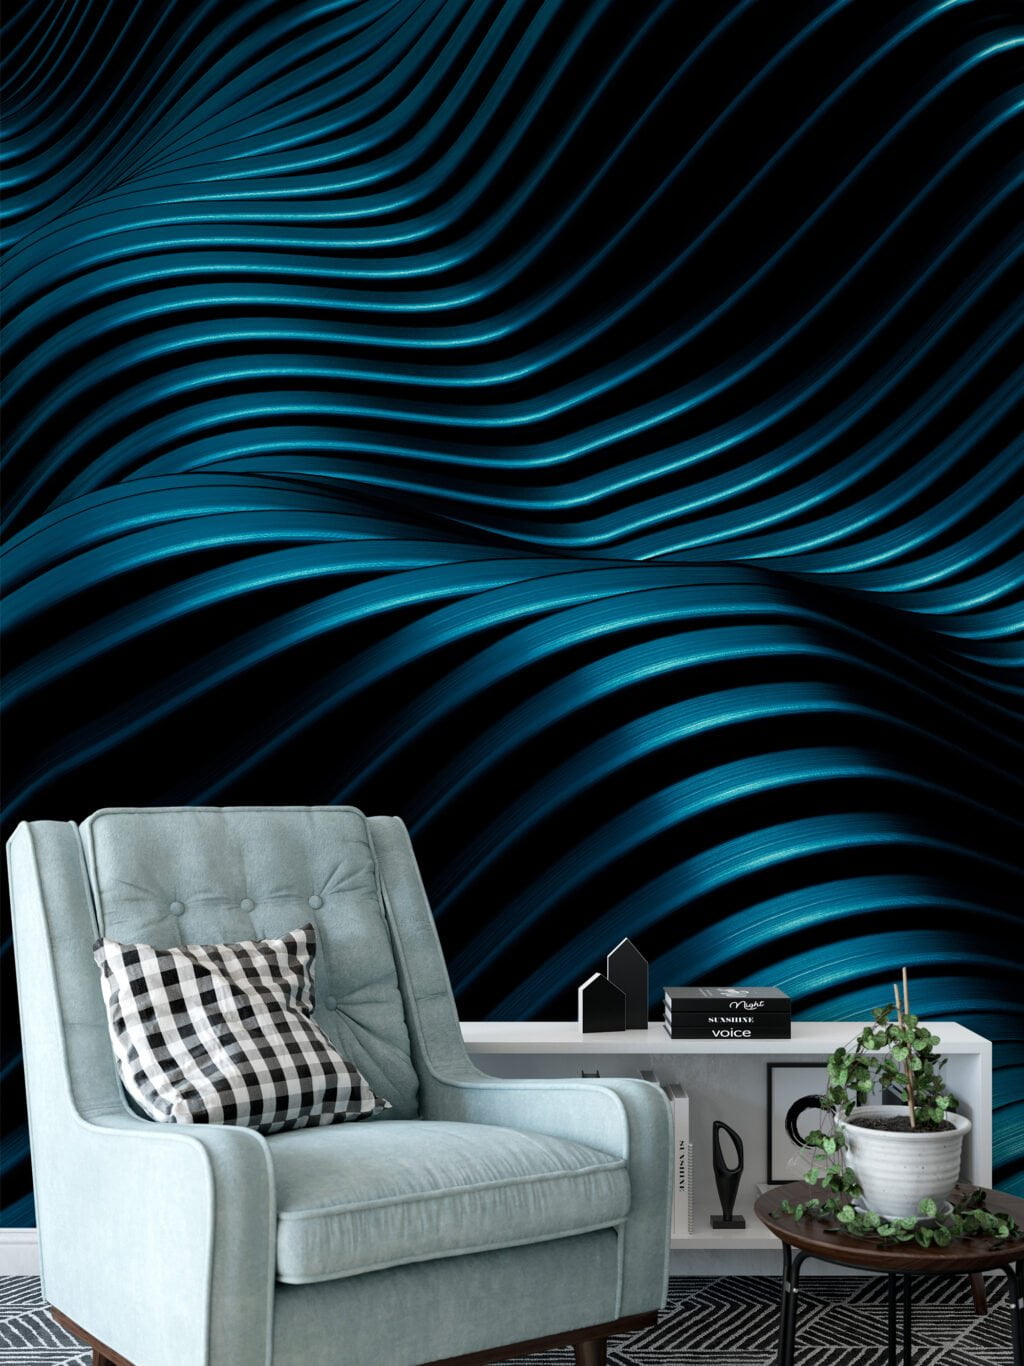 Self-Adhesive Dark Turquoise Waves Wallpaper, Customizable Mural for Any Space, Removable